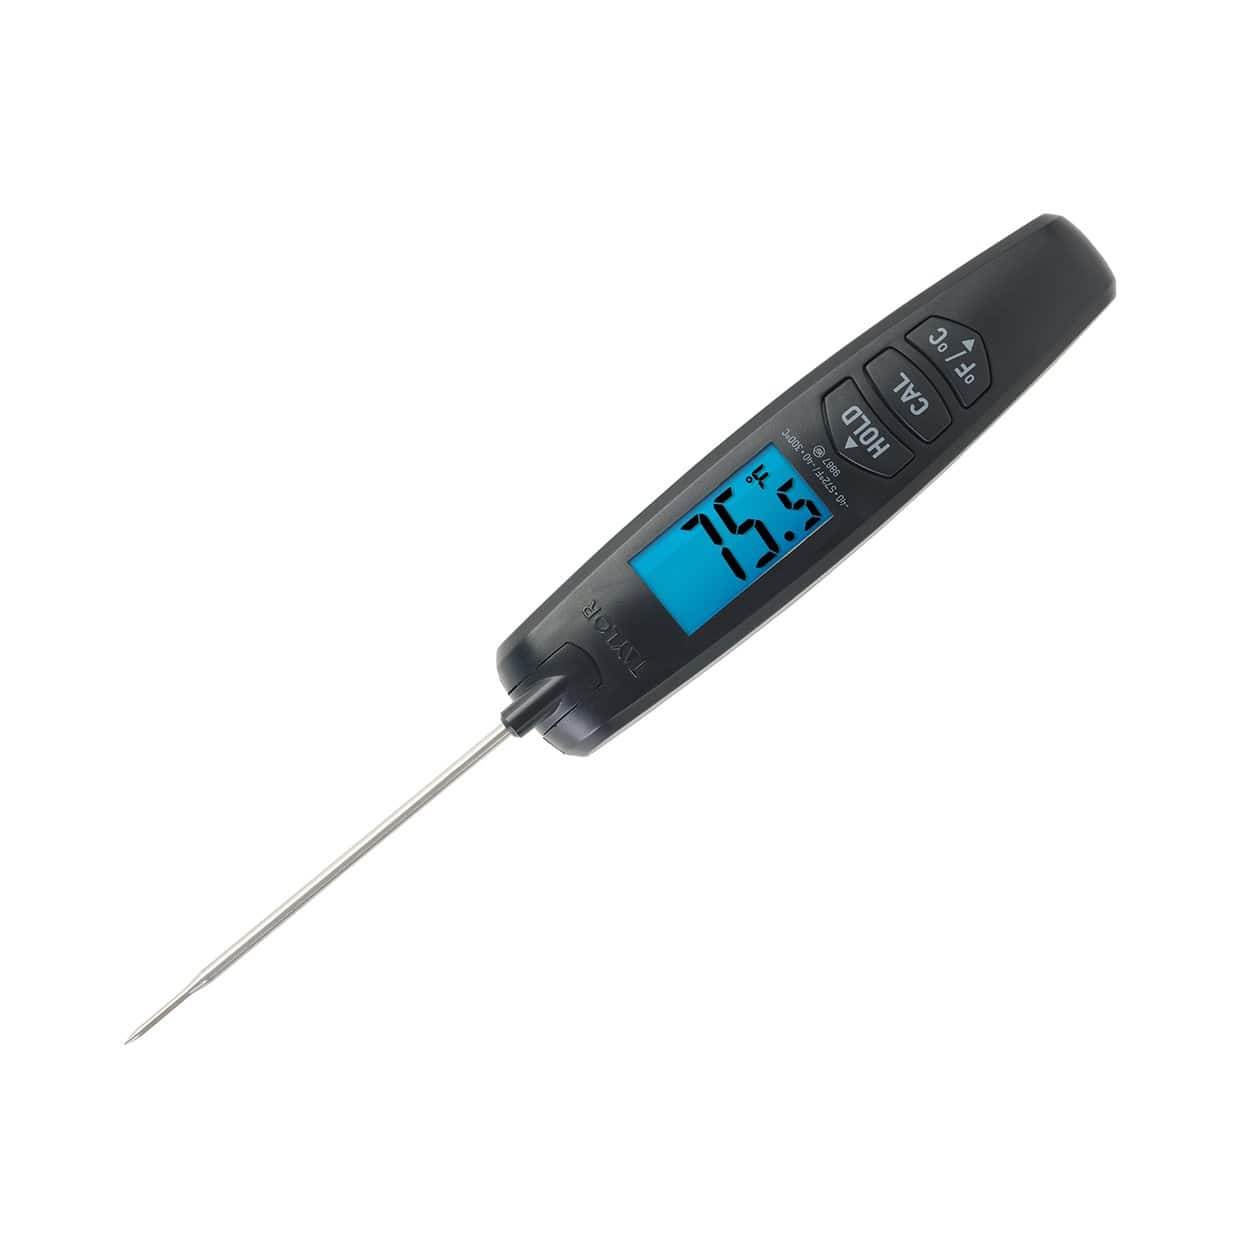 Taylor Pro Digital Cooking Thermometer with Probe - Shop Utensils